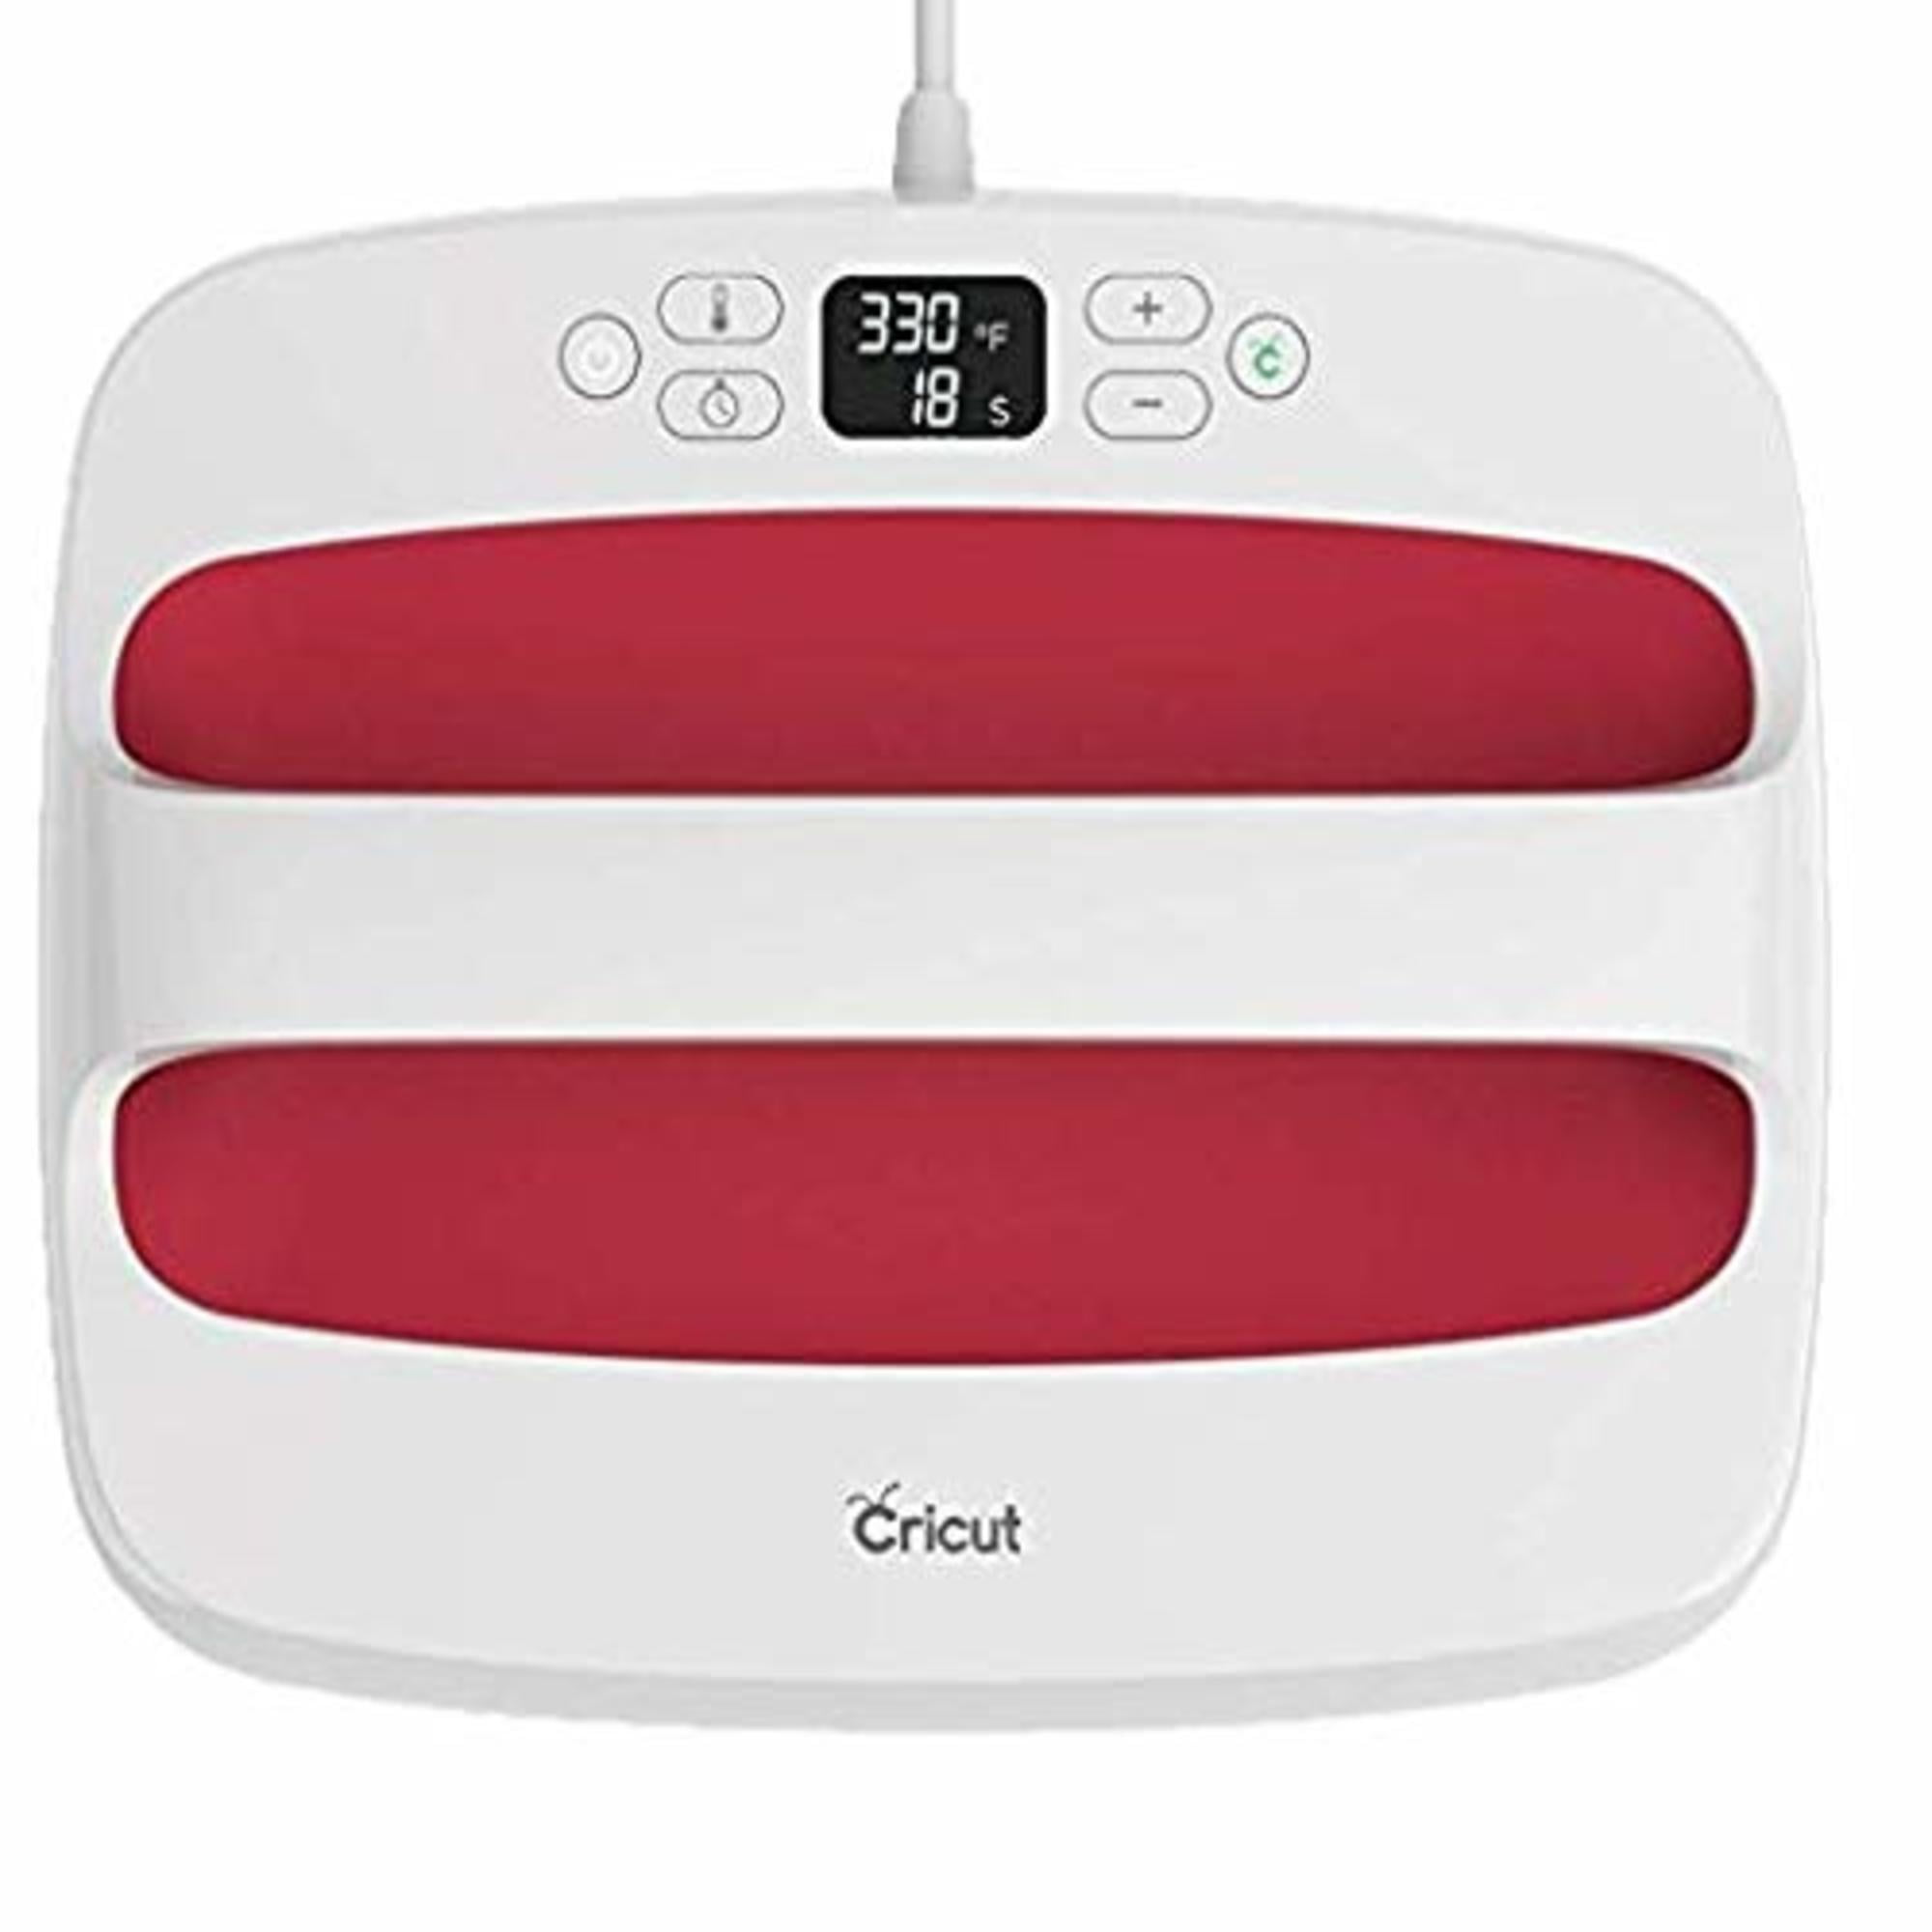  Cricut EasyPress 3 Smart Heat Press Machine with Built-in  Bluetooth for T-Shirts, Pillows & EasyPress Mini Heat Press for Small  Objects Like Shoes : Arts, Crafts & Sewing